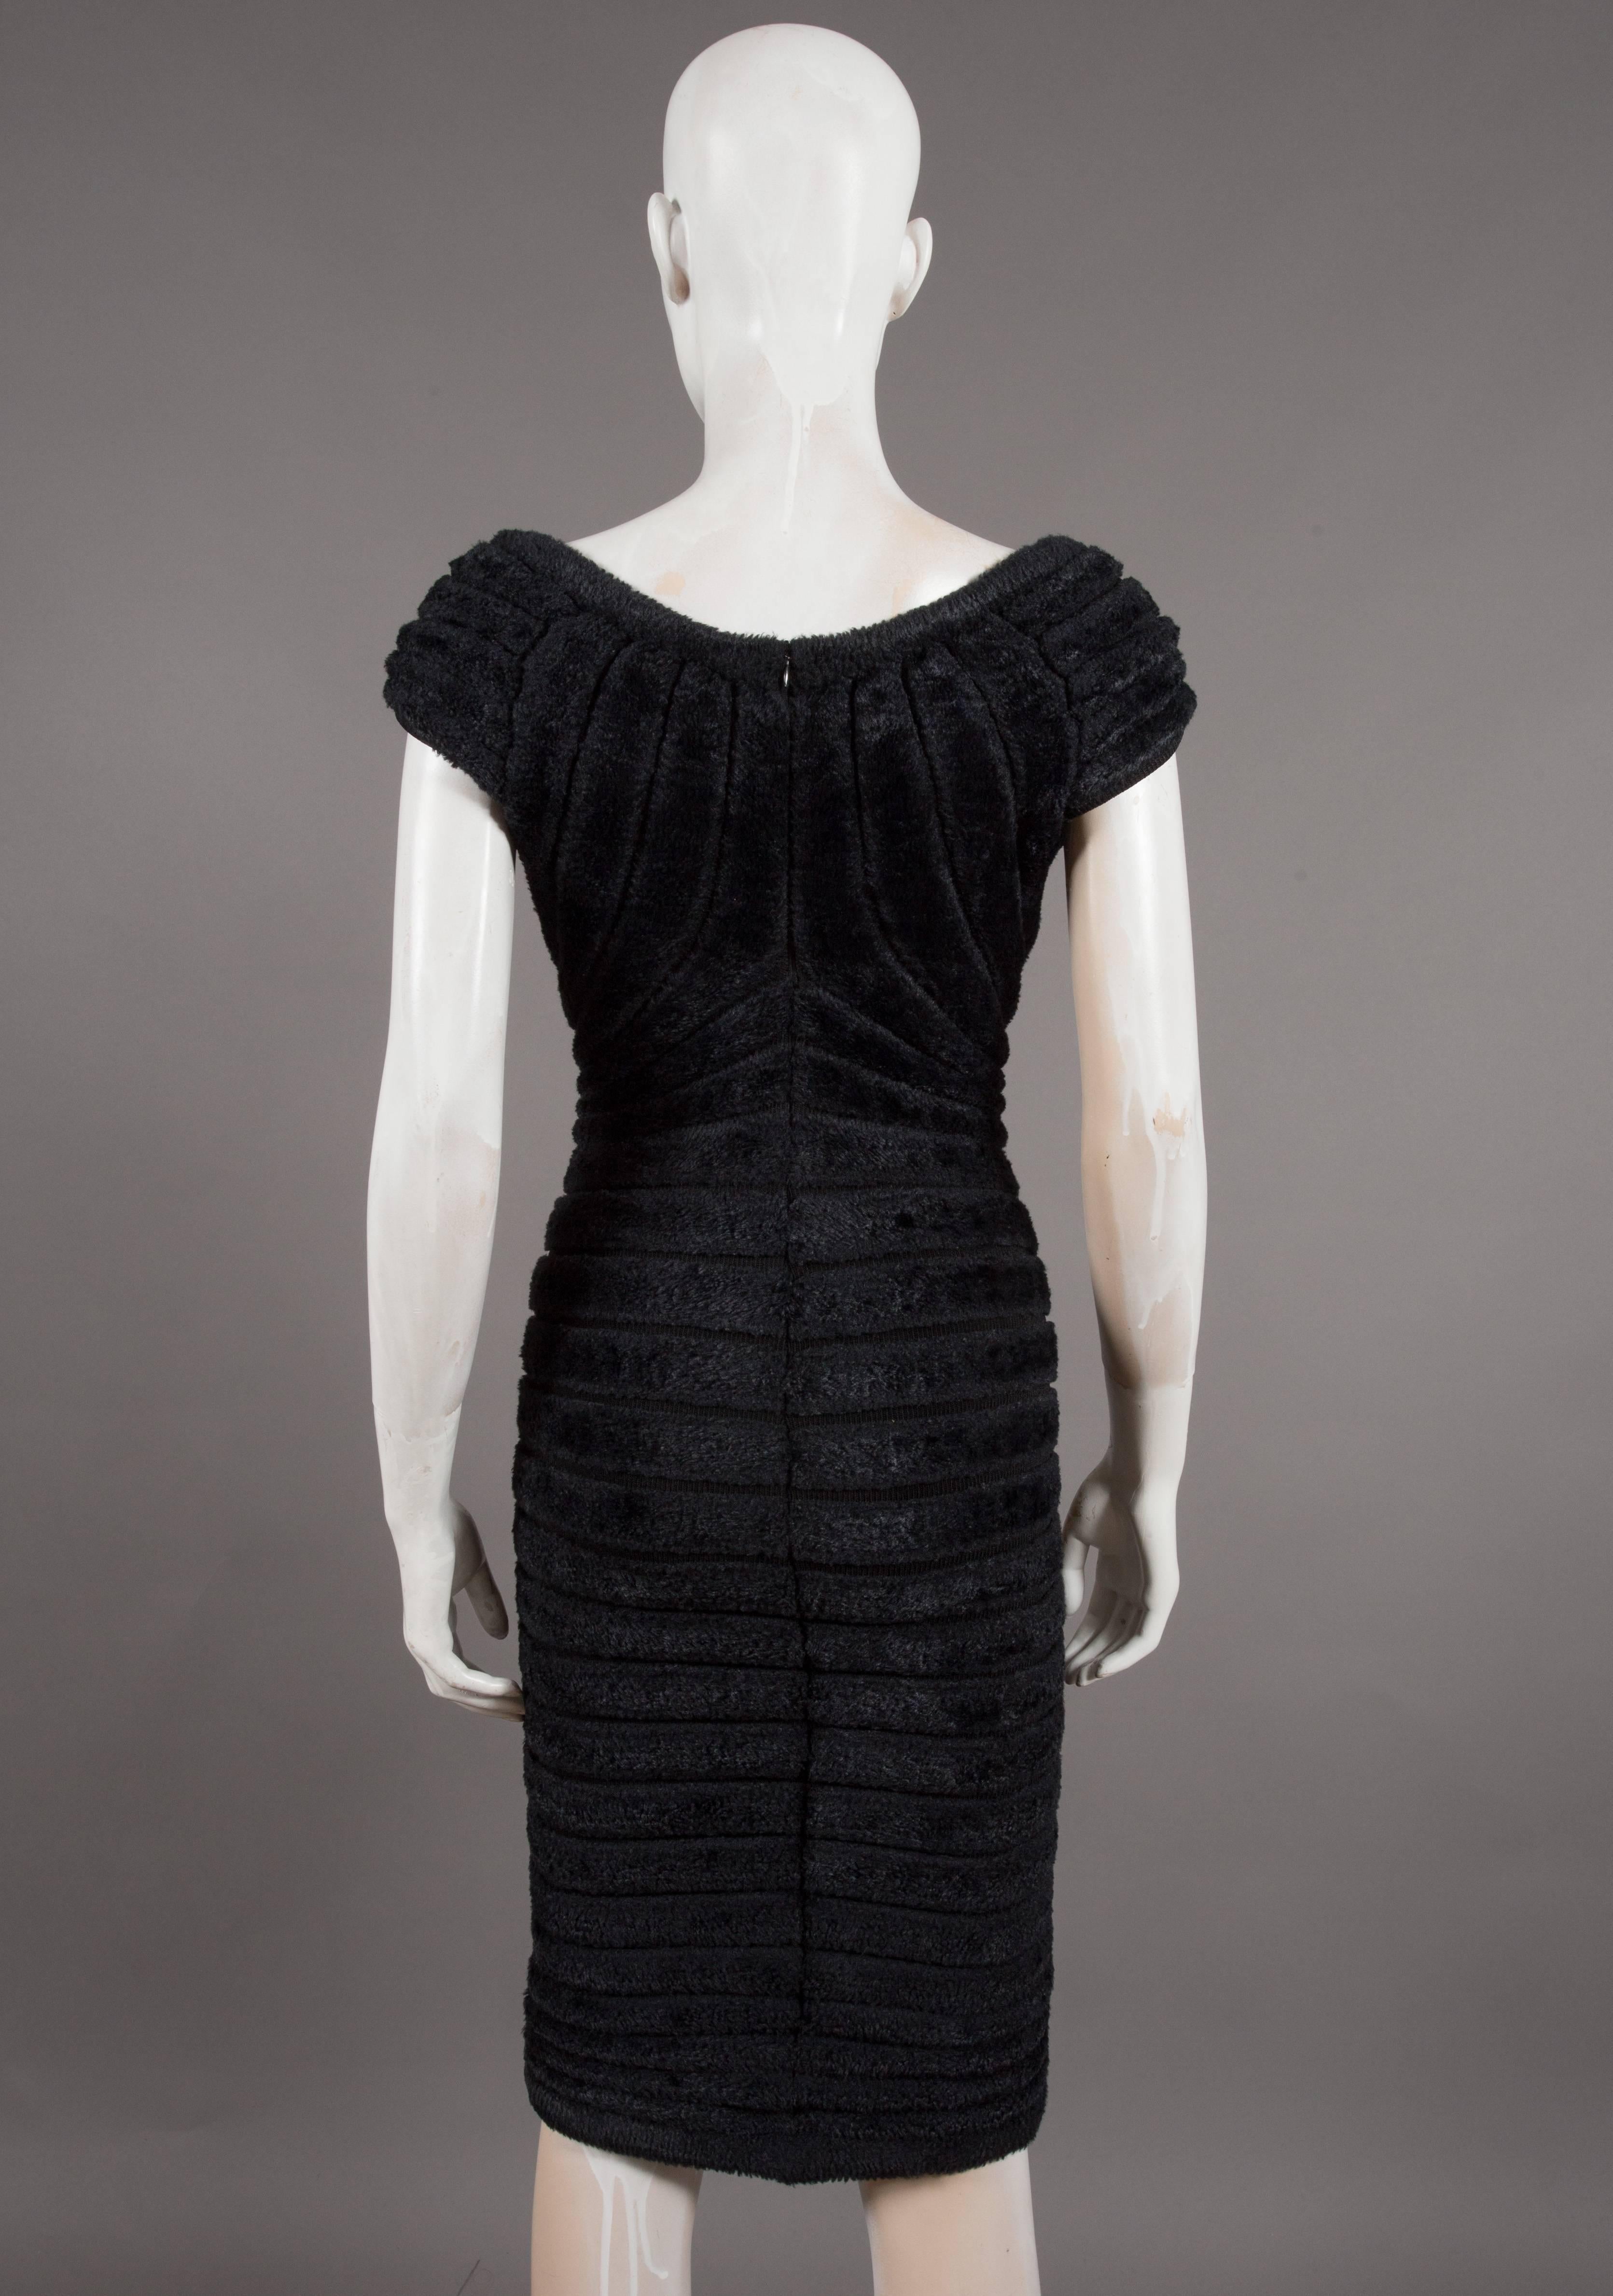 Women's Alaïa black chenille-knitted evening gown, 'Houpette', C. 1994